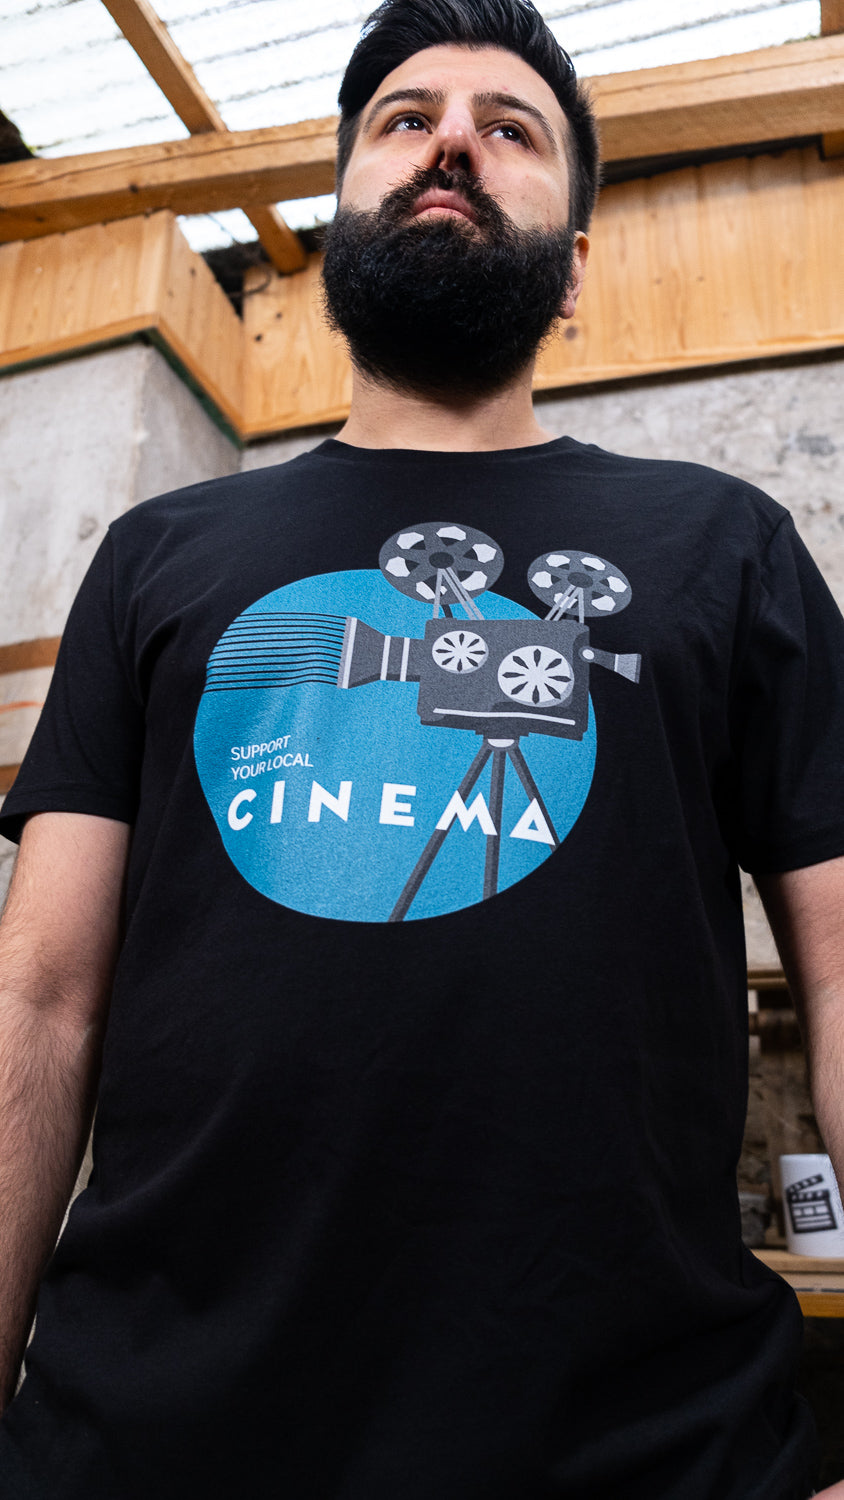 SUPPORT YOUR LOCAL CINEMA T-Shirt